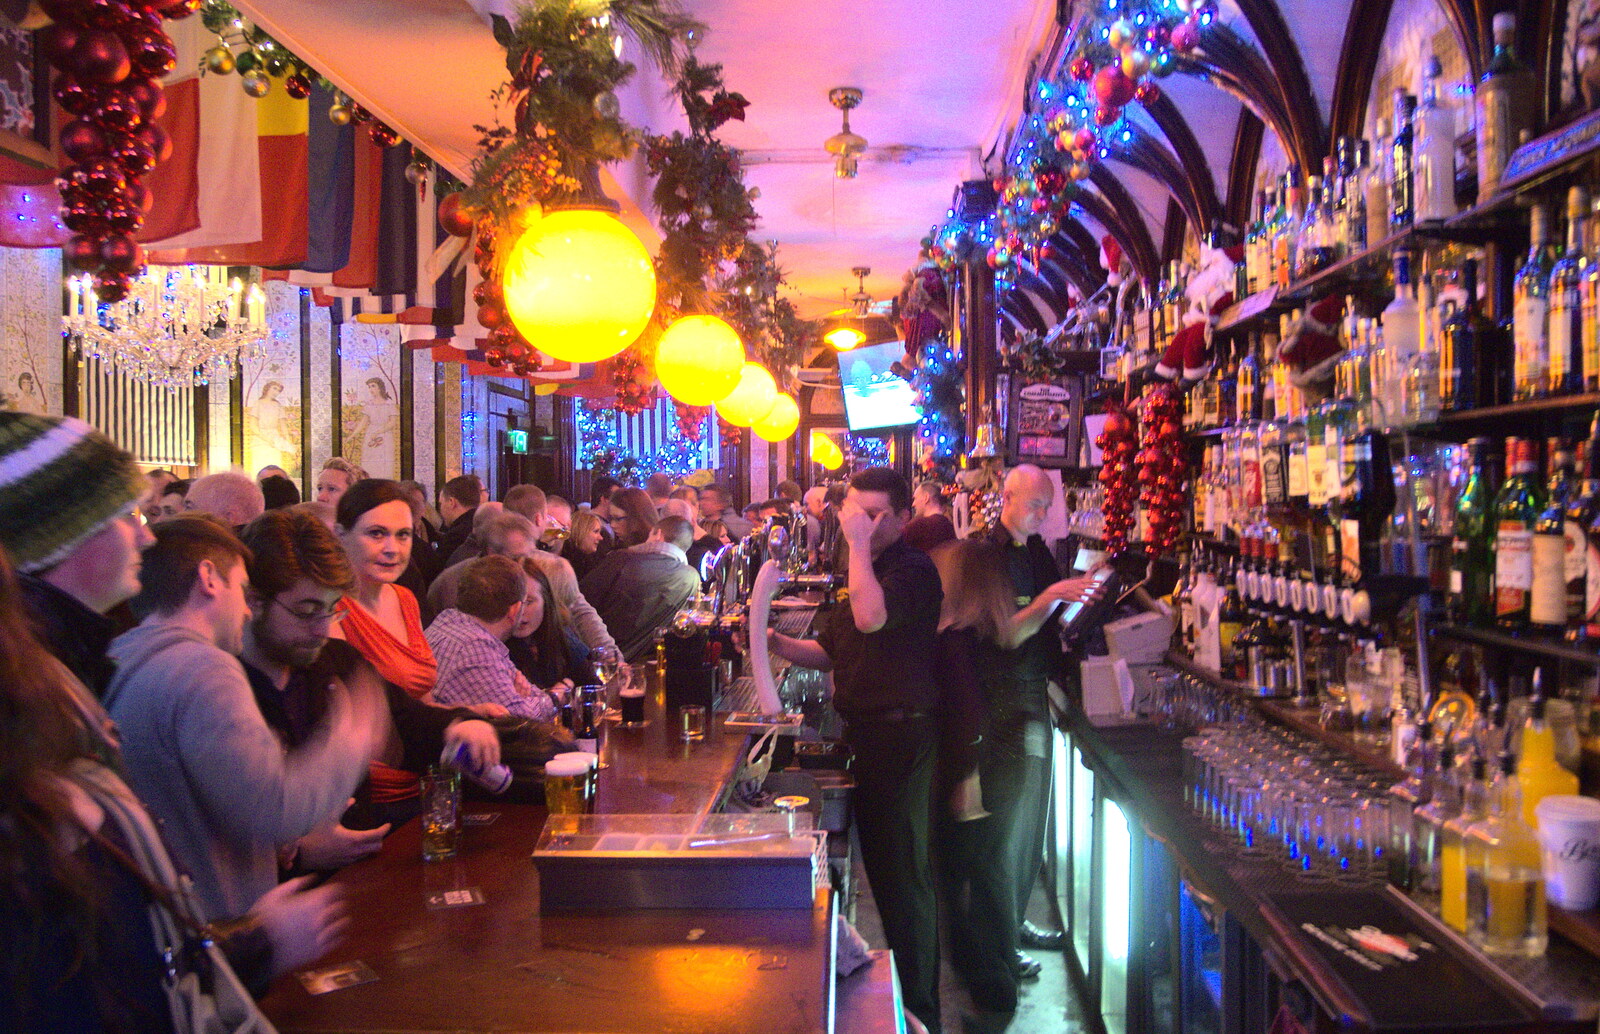 The packed bar in Bruxelles from A Night on the Lash, Dublin, Ireland - 14th December 2012